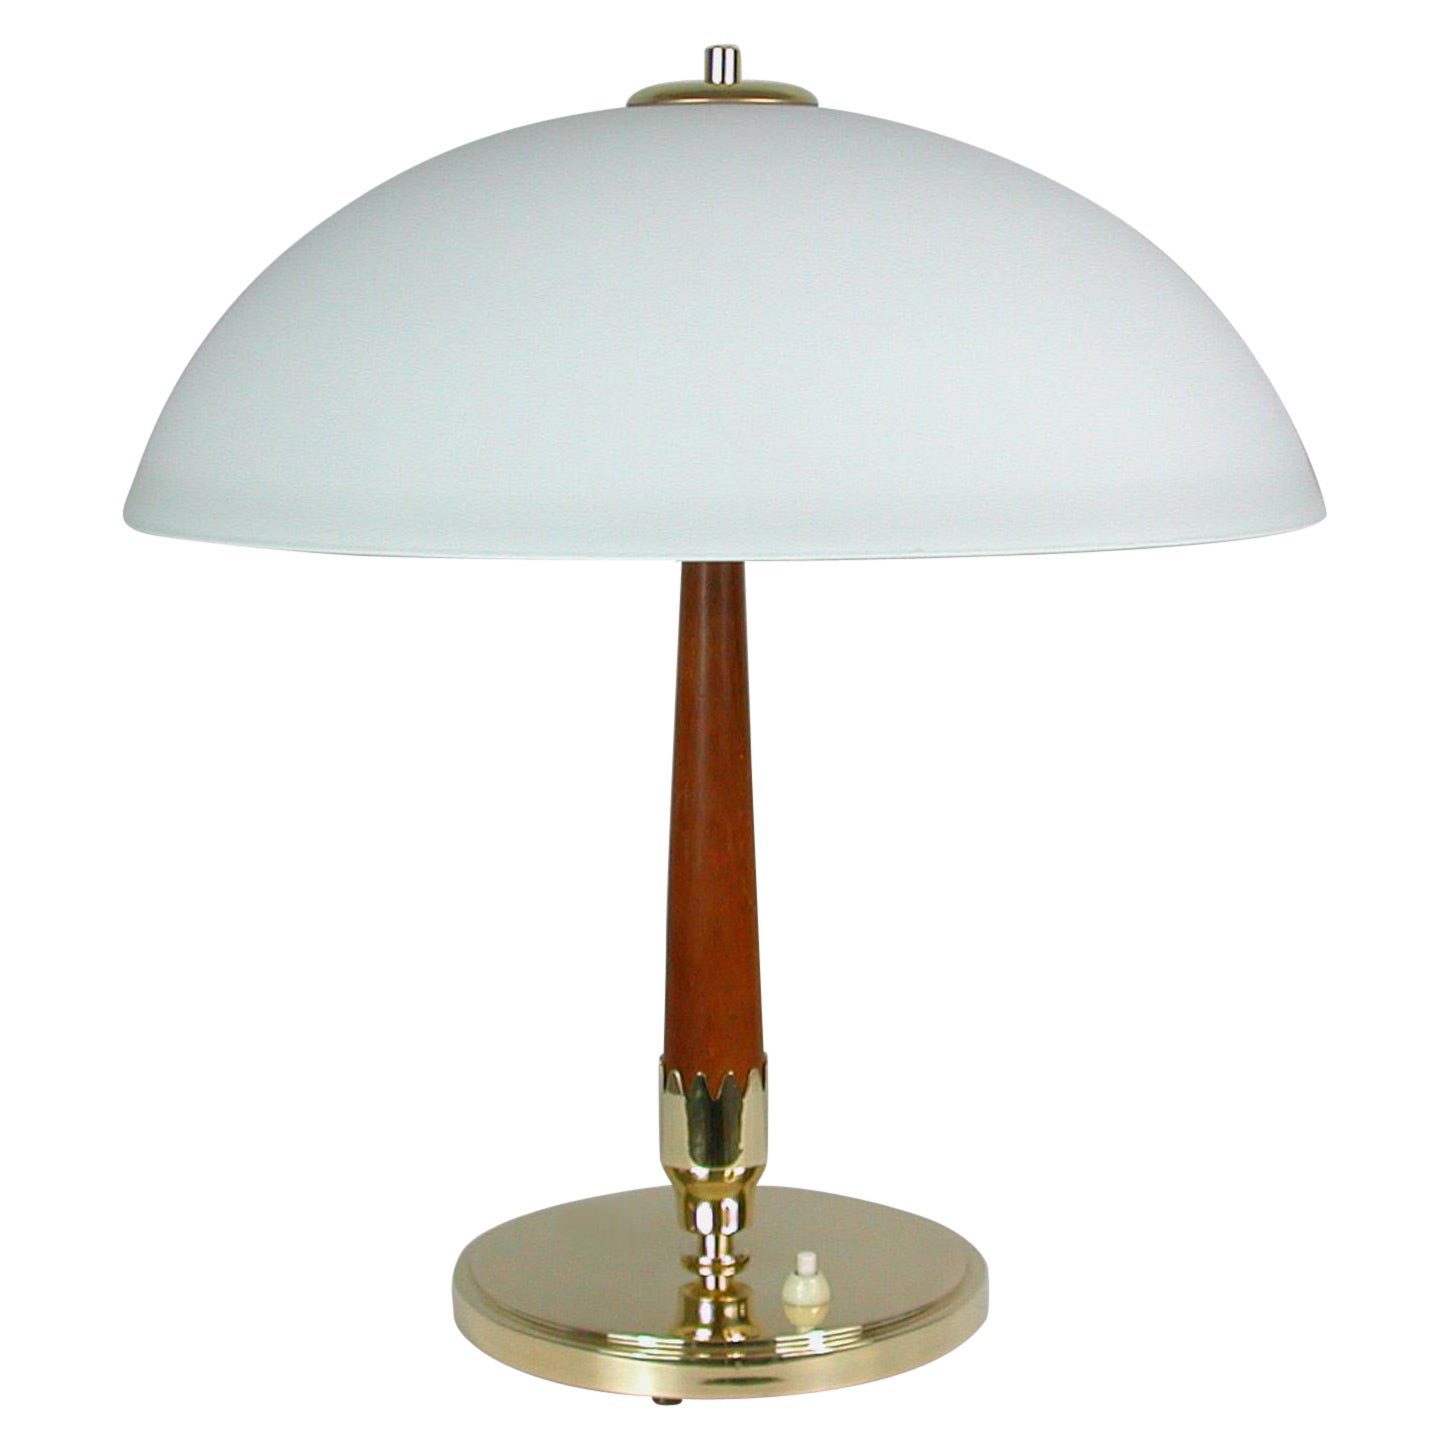 Midcentury Swedish Teak, Brass and Frosted Glass Table Lamp by Böhlmarks, 1950s